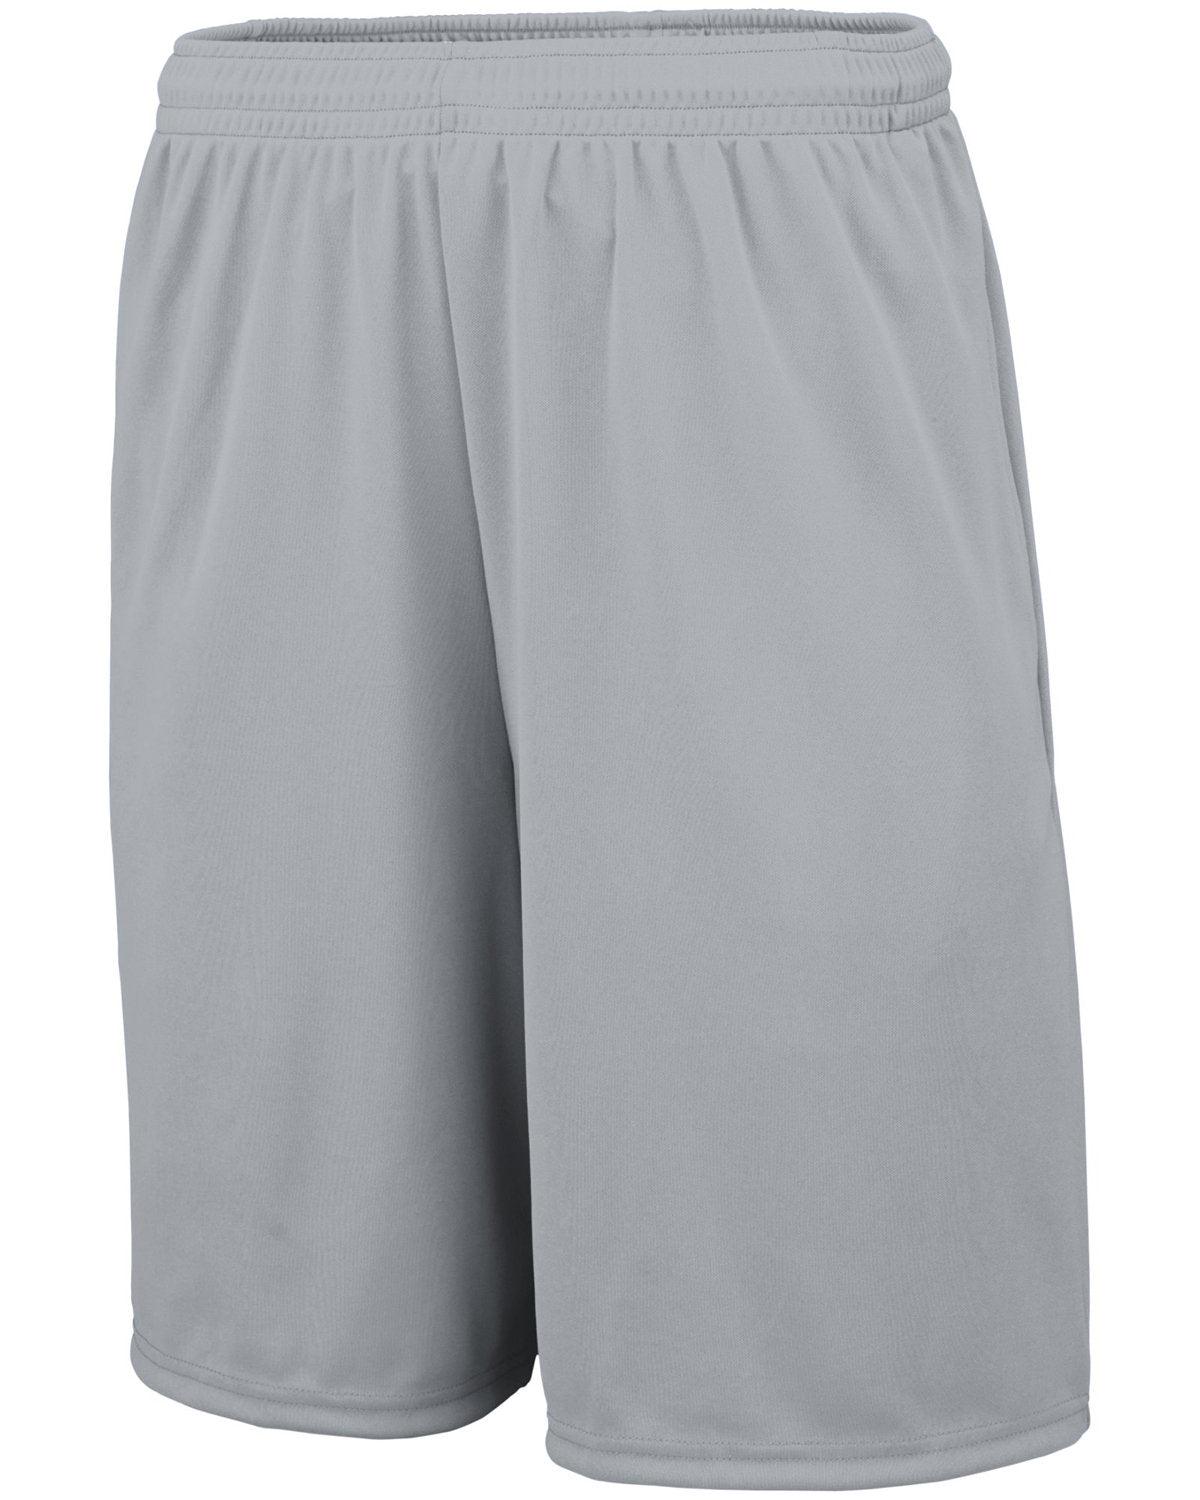 Adult Training Short with Pockets - Apparel Globe